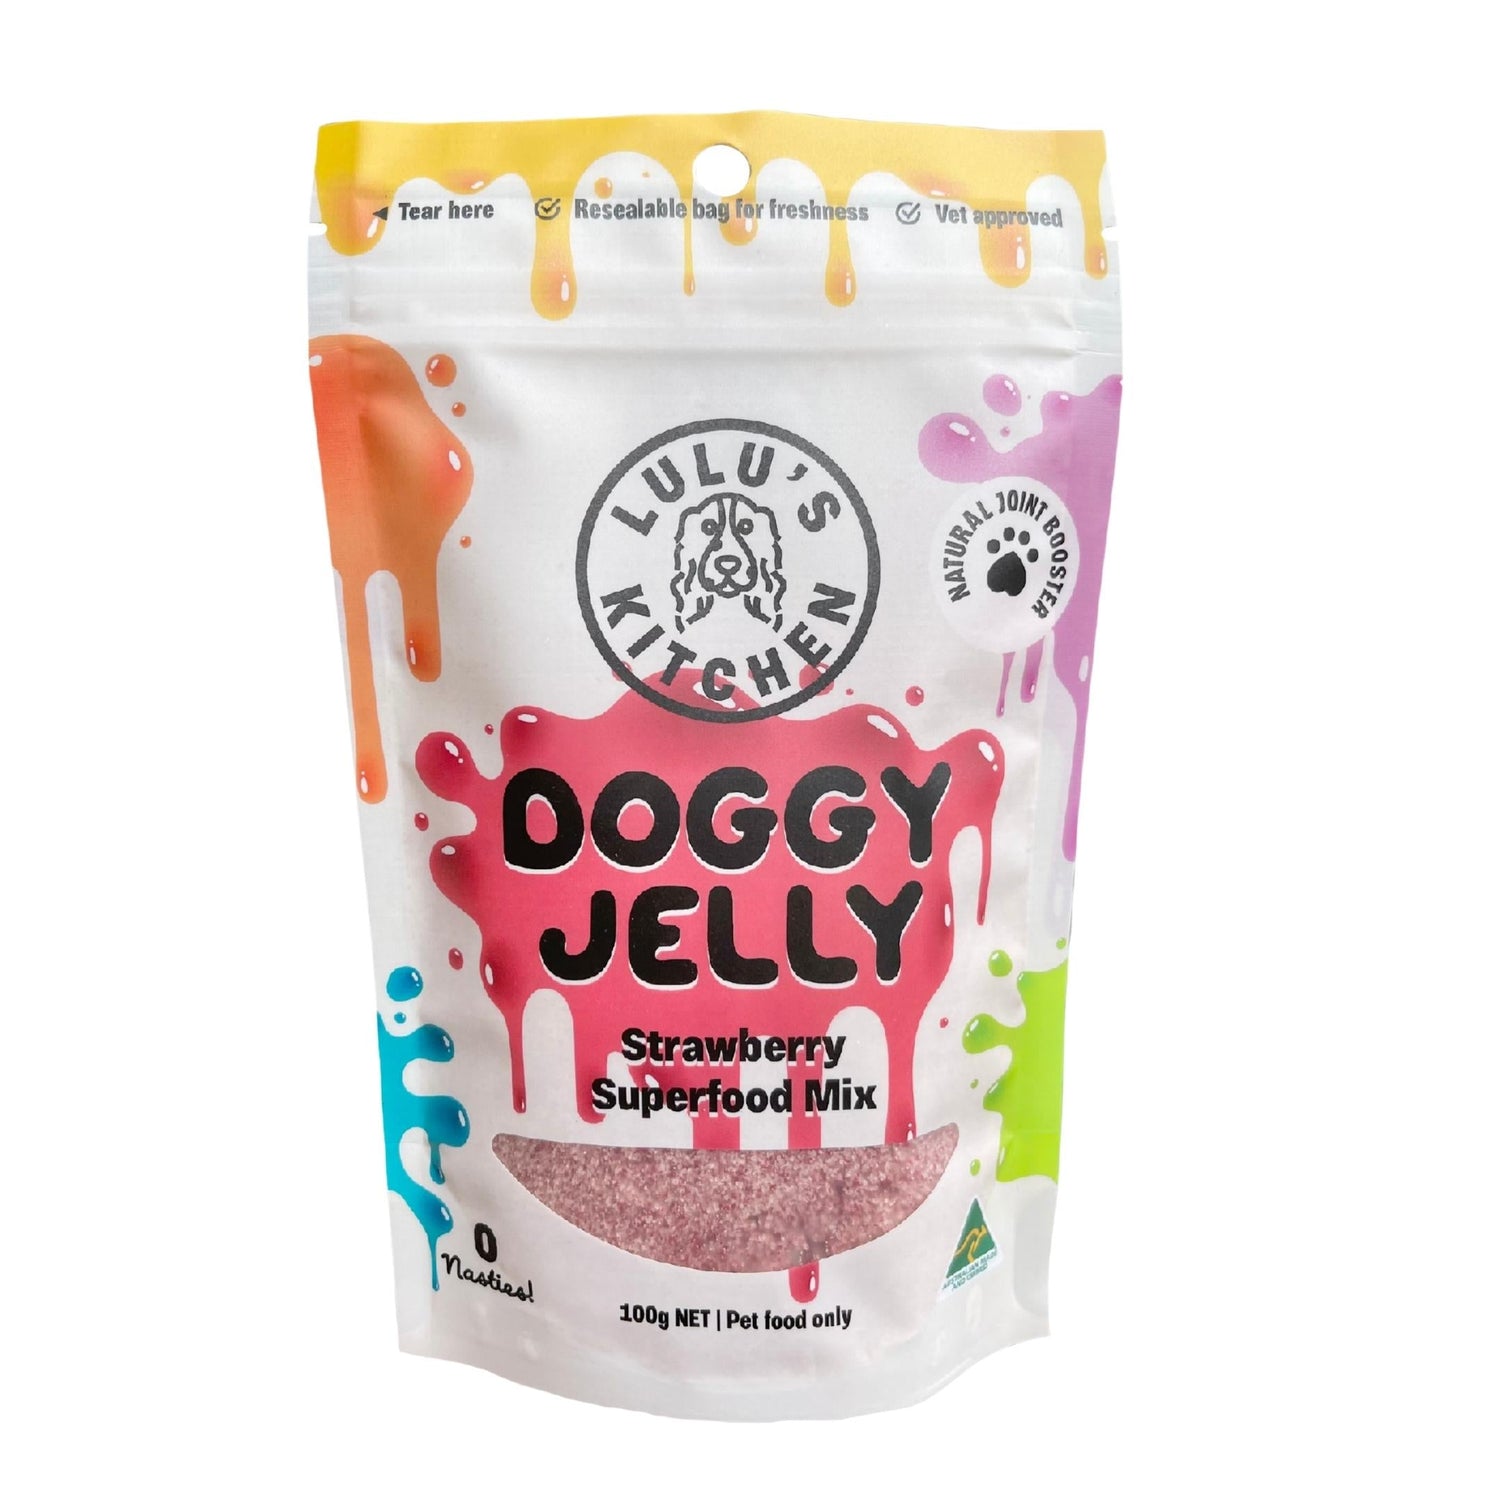 Doggy Superfood Jelly